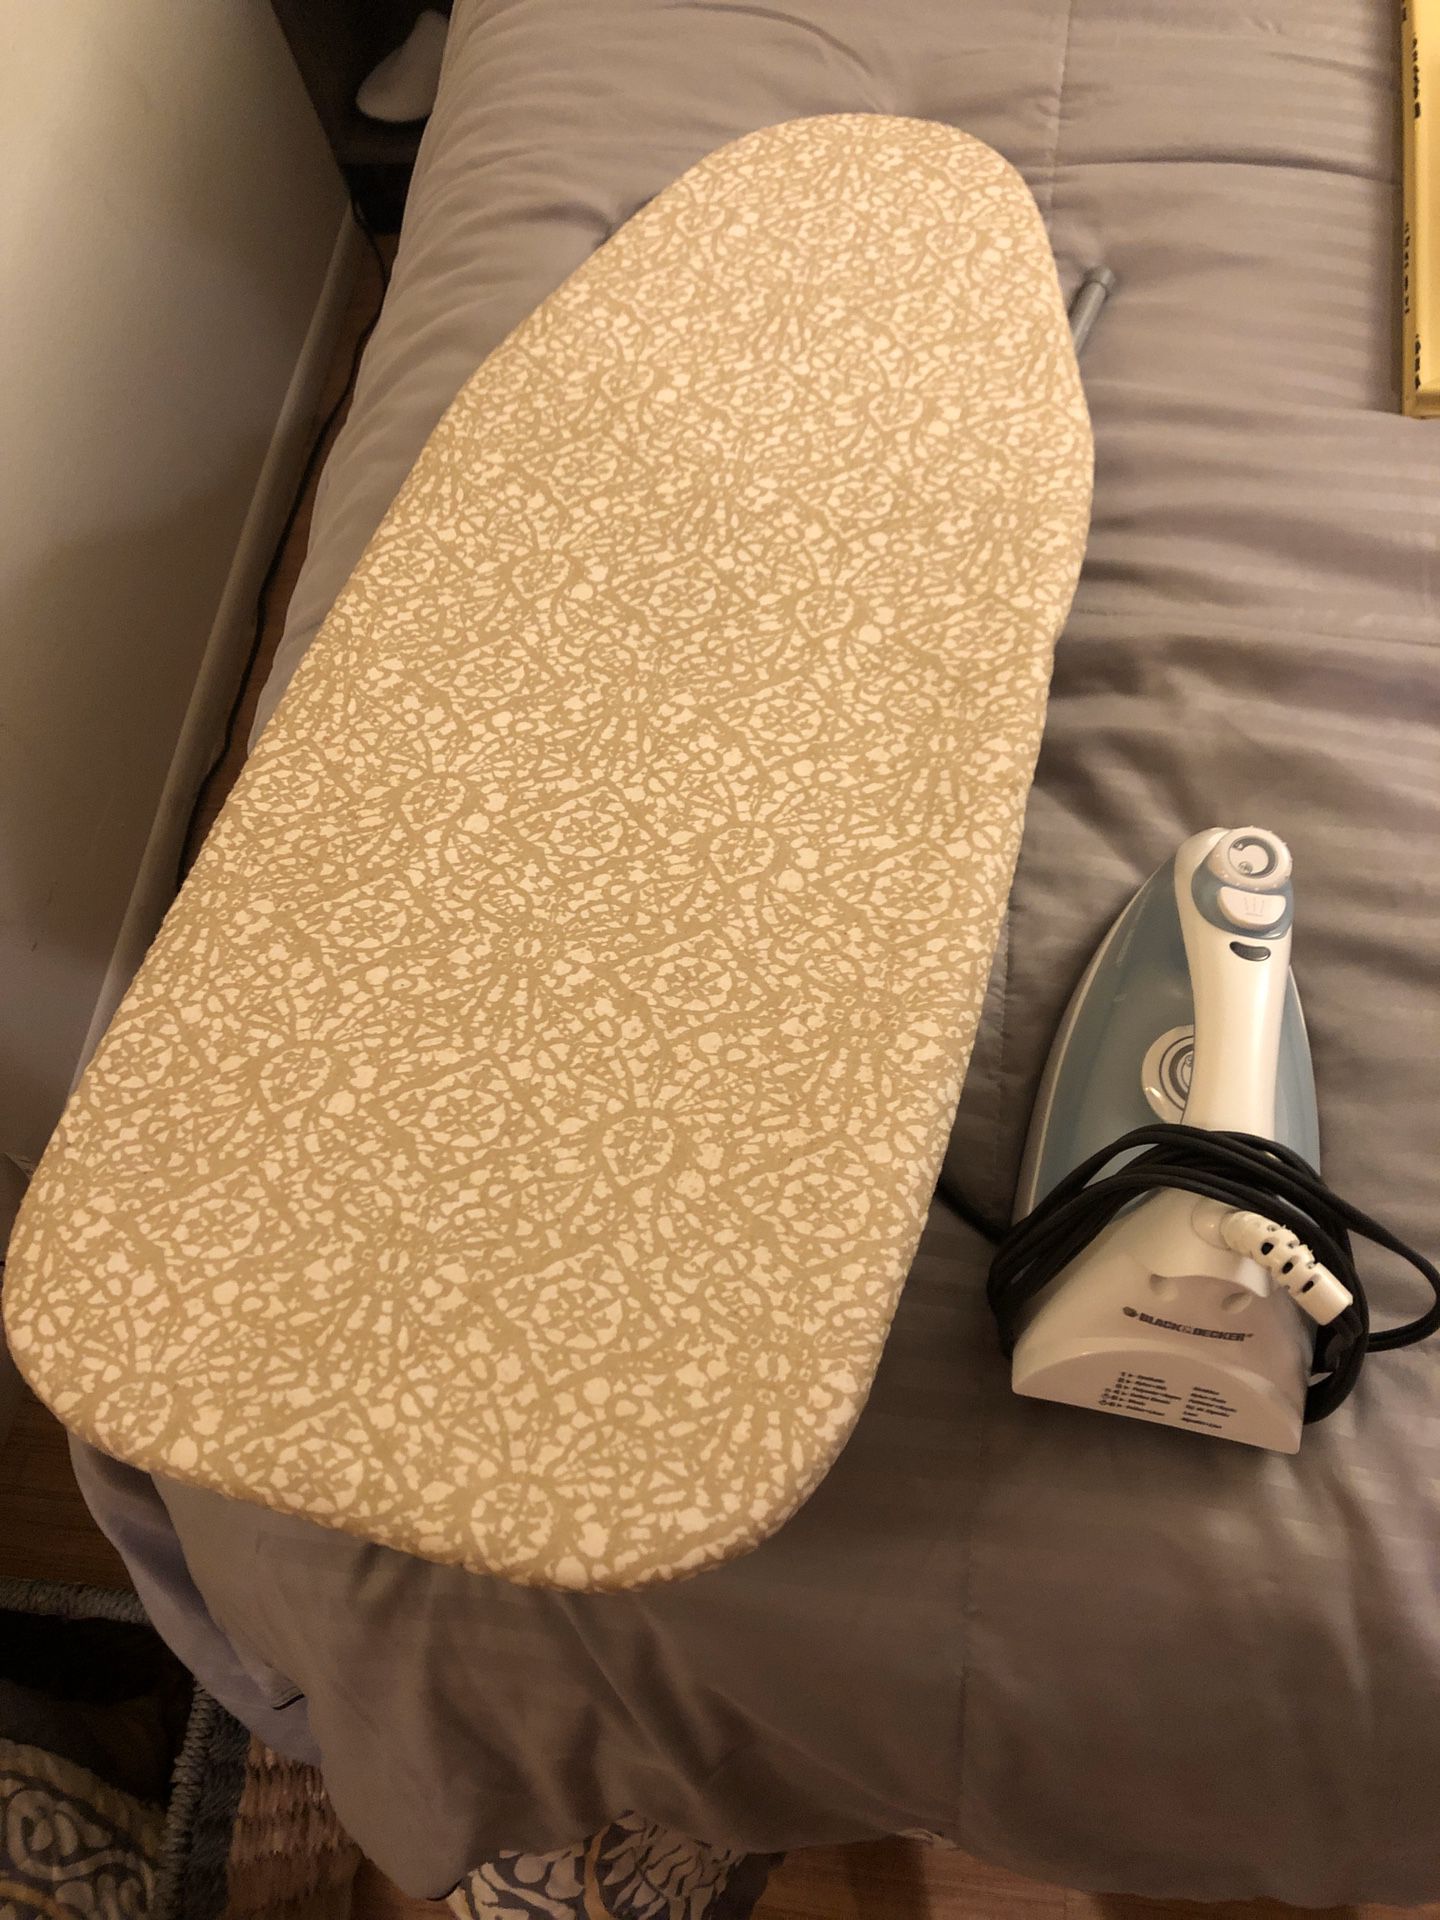 Tabletop ironing board (iron not included)